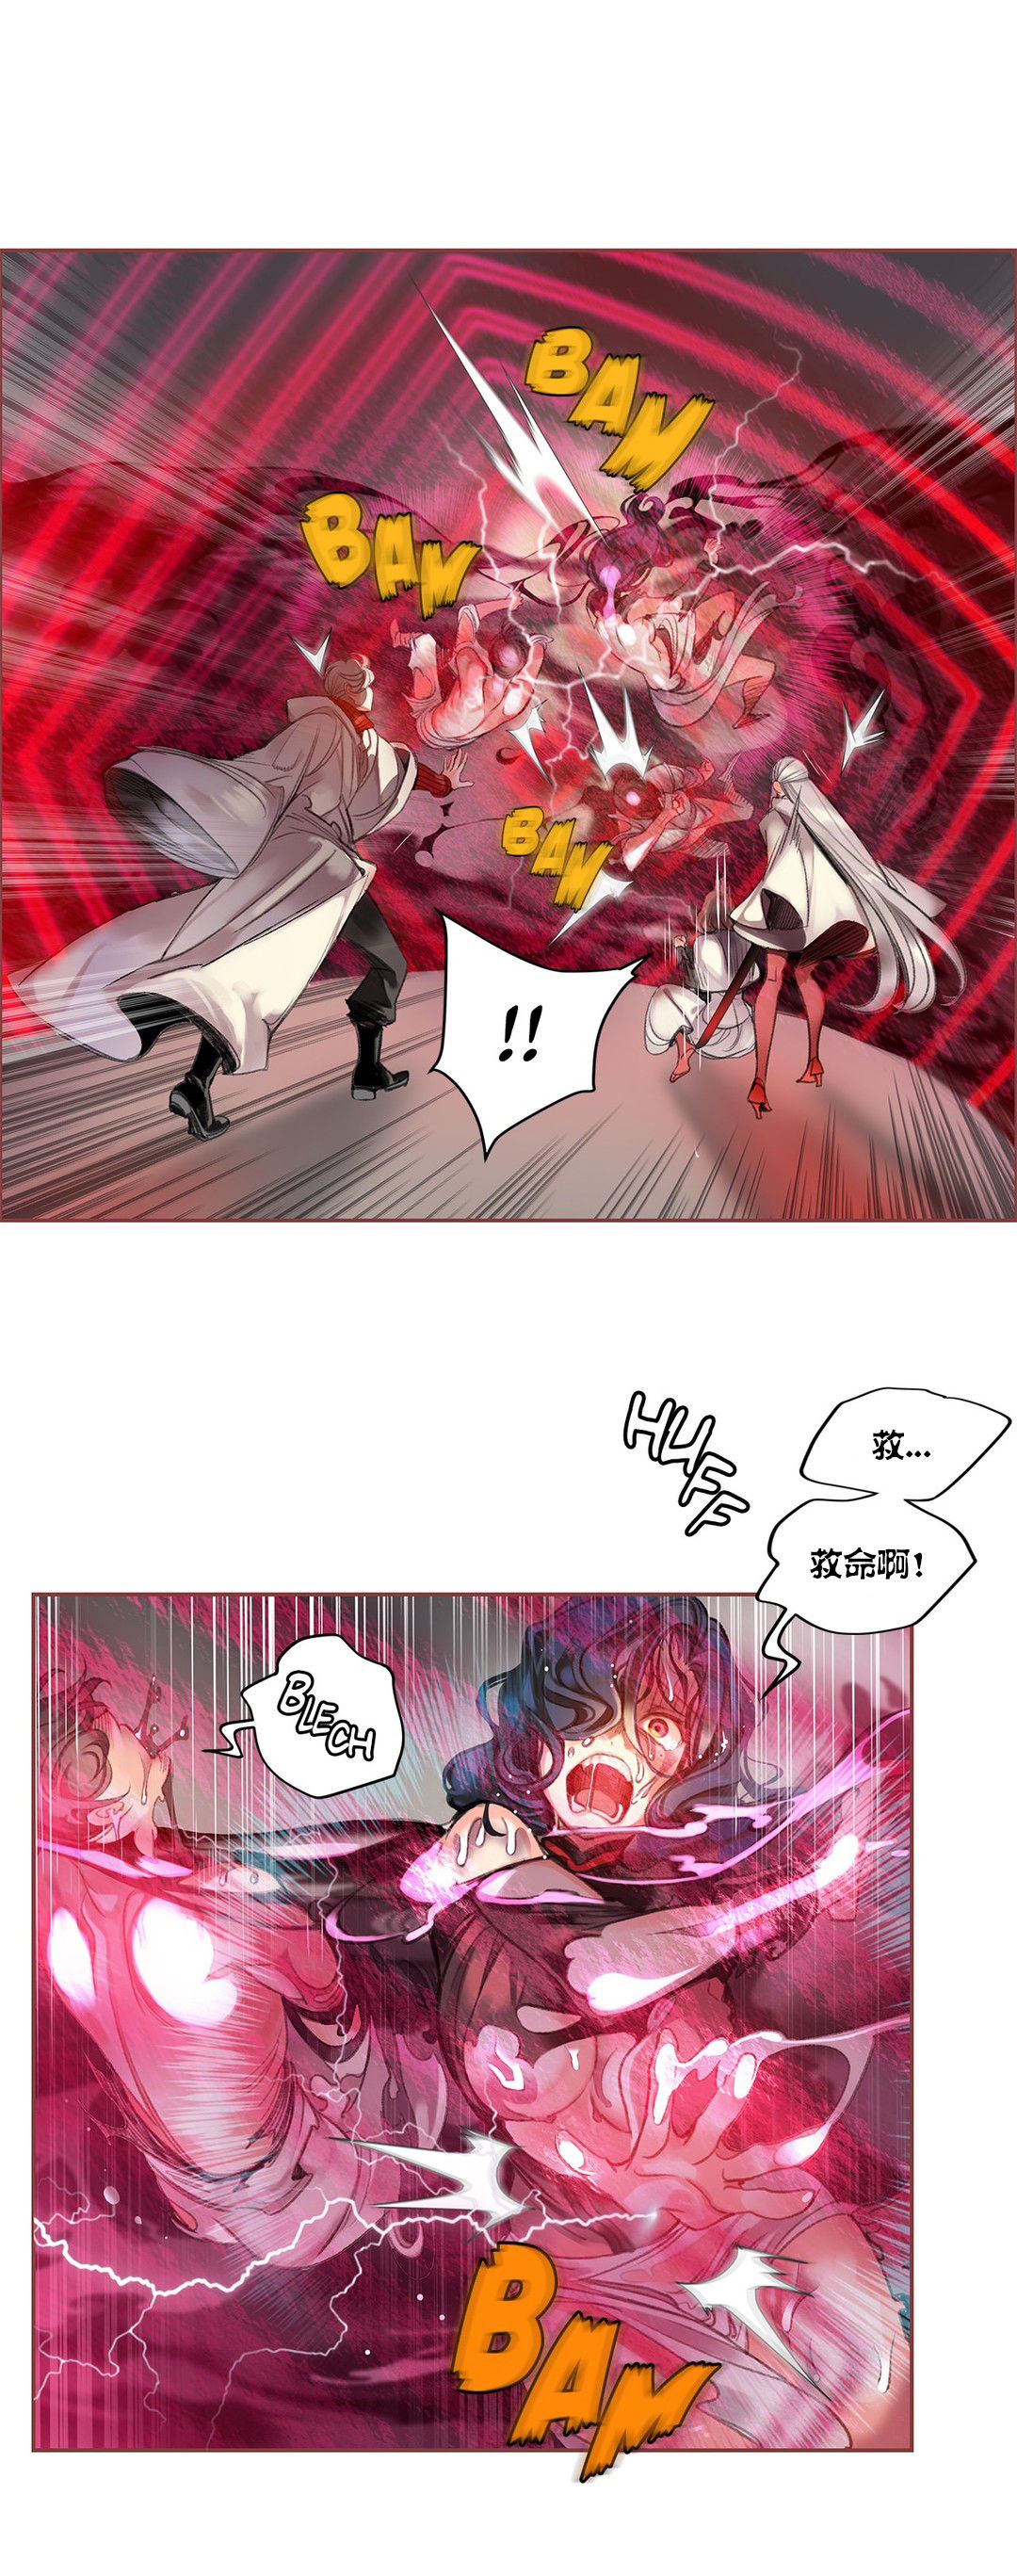 [Juder] Lilith`s Cord (第二季) Ch.61-66 [Chinese] [aaatwist个人汉化] [Ongoing] page 24 full